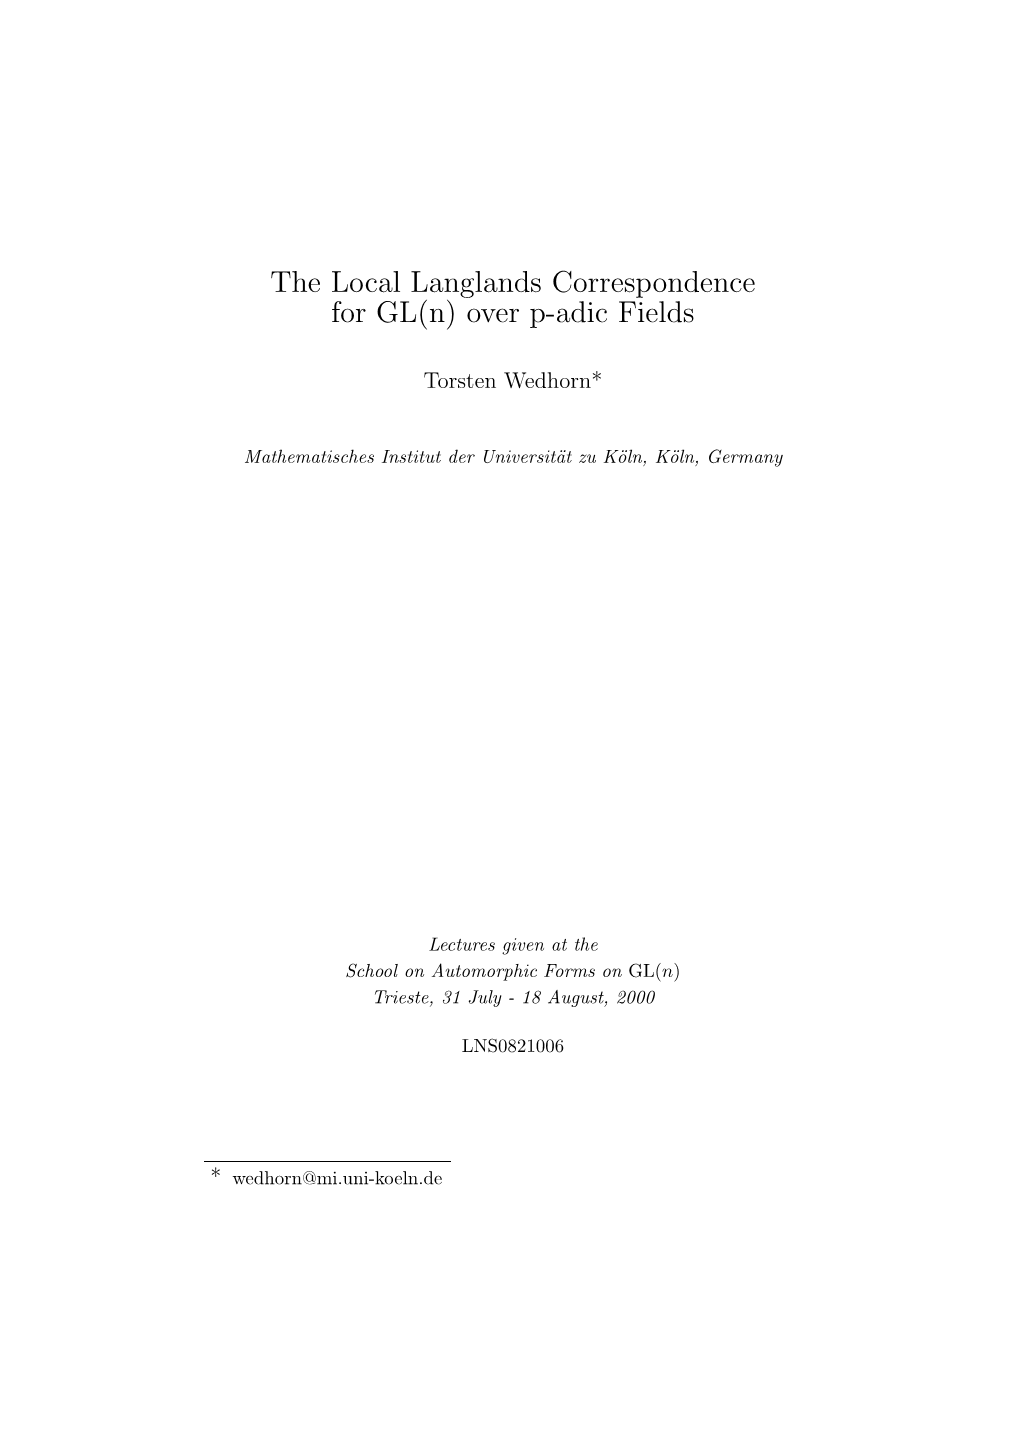 The Local Langlands Correspondence for GL(N) Over P-Adic Fields